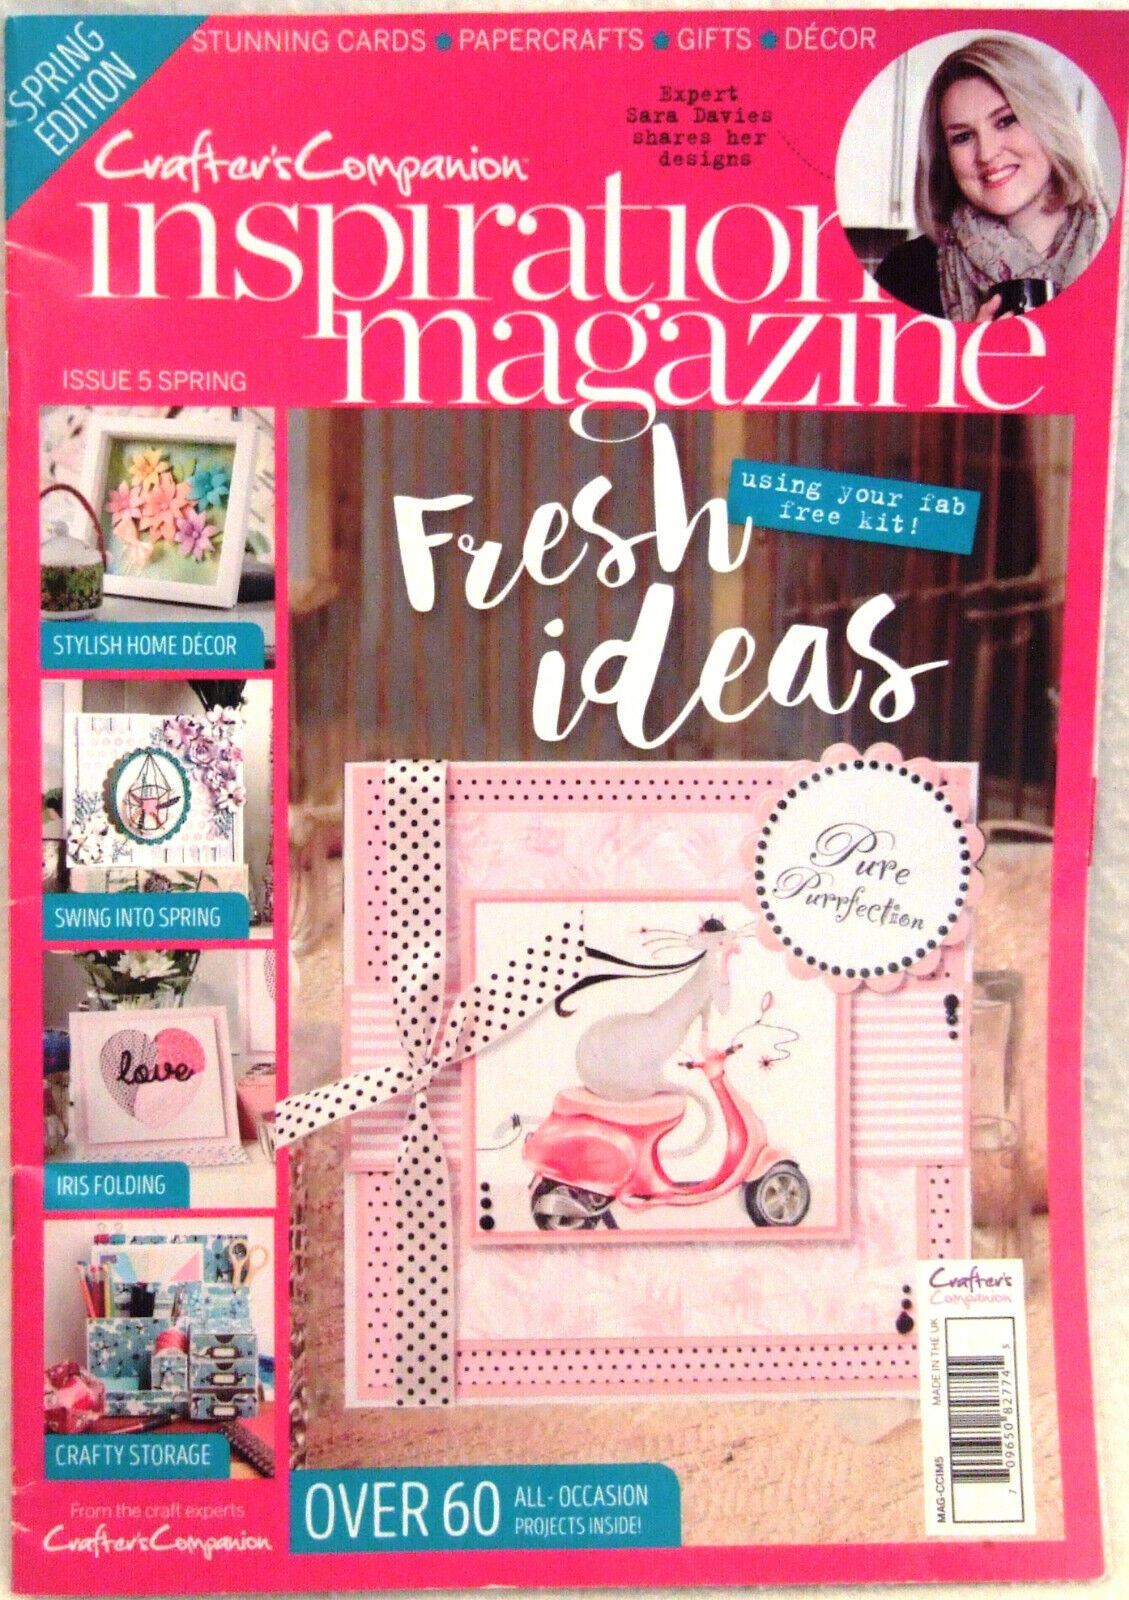 Crafters Companion Inspiration Magazine Issue 5 - Magazine Only